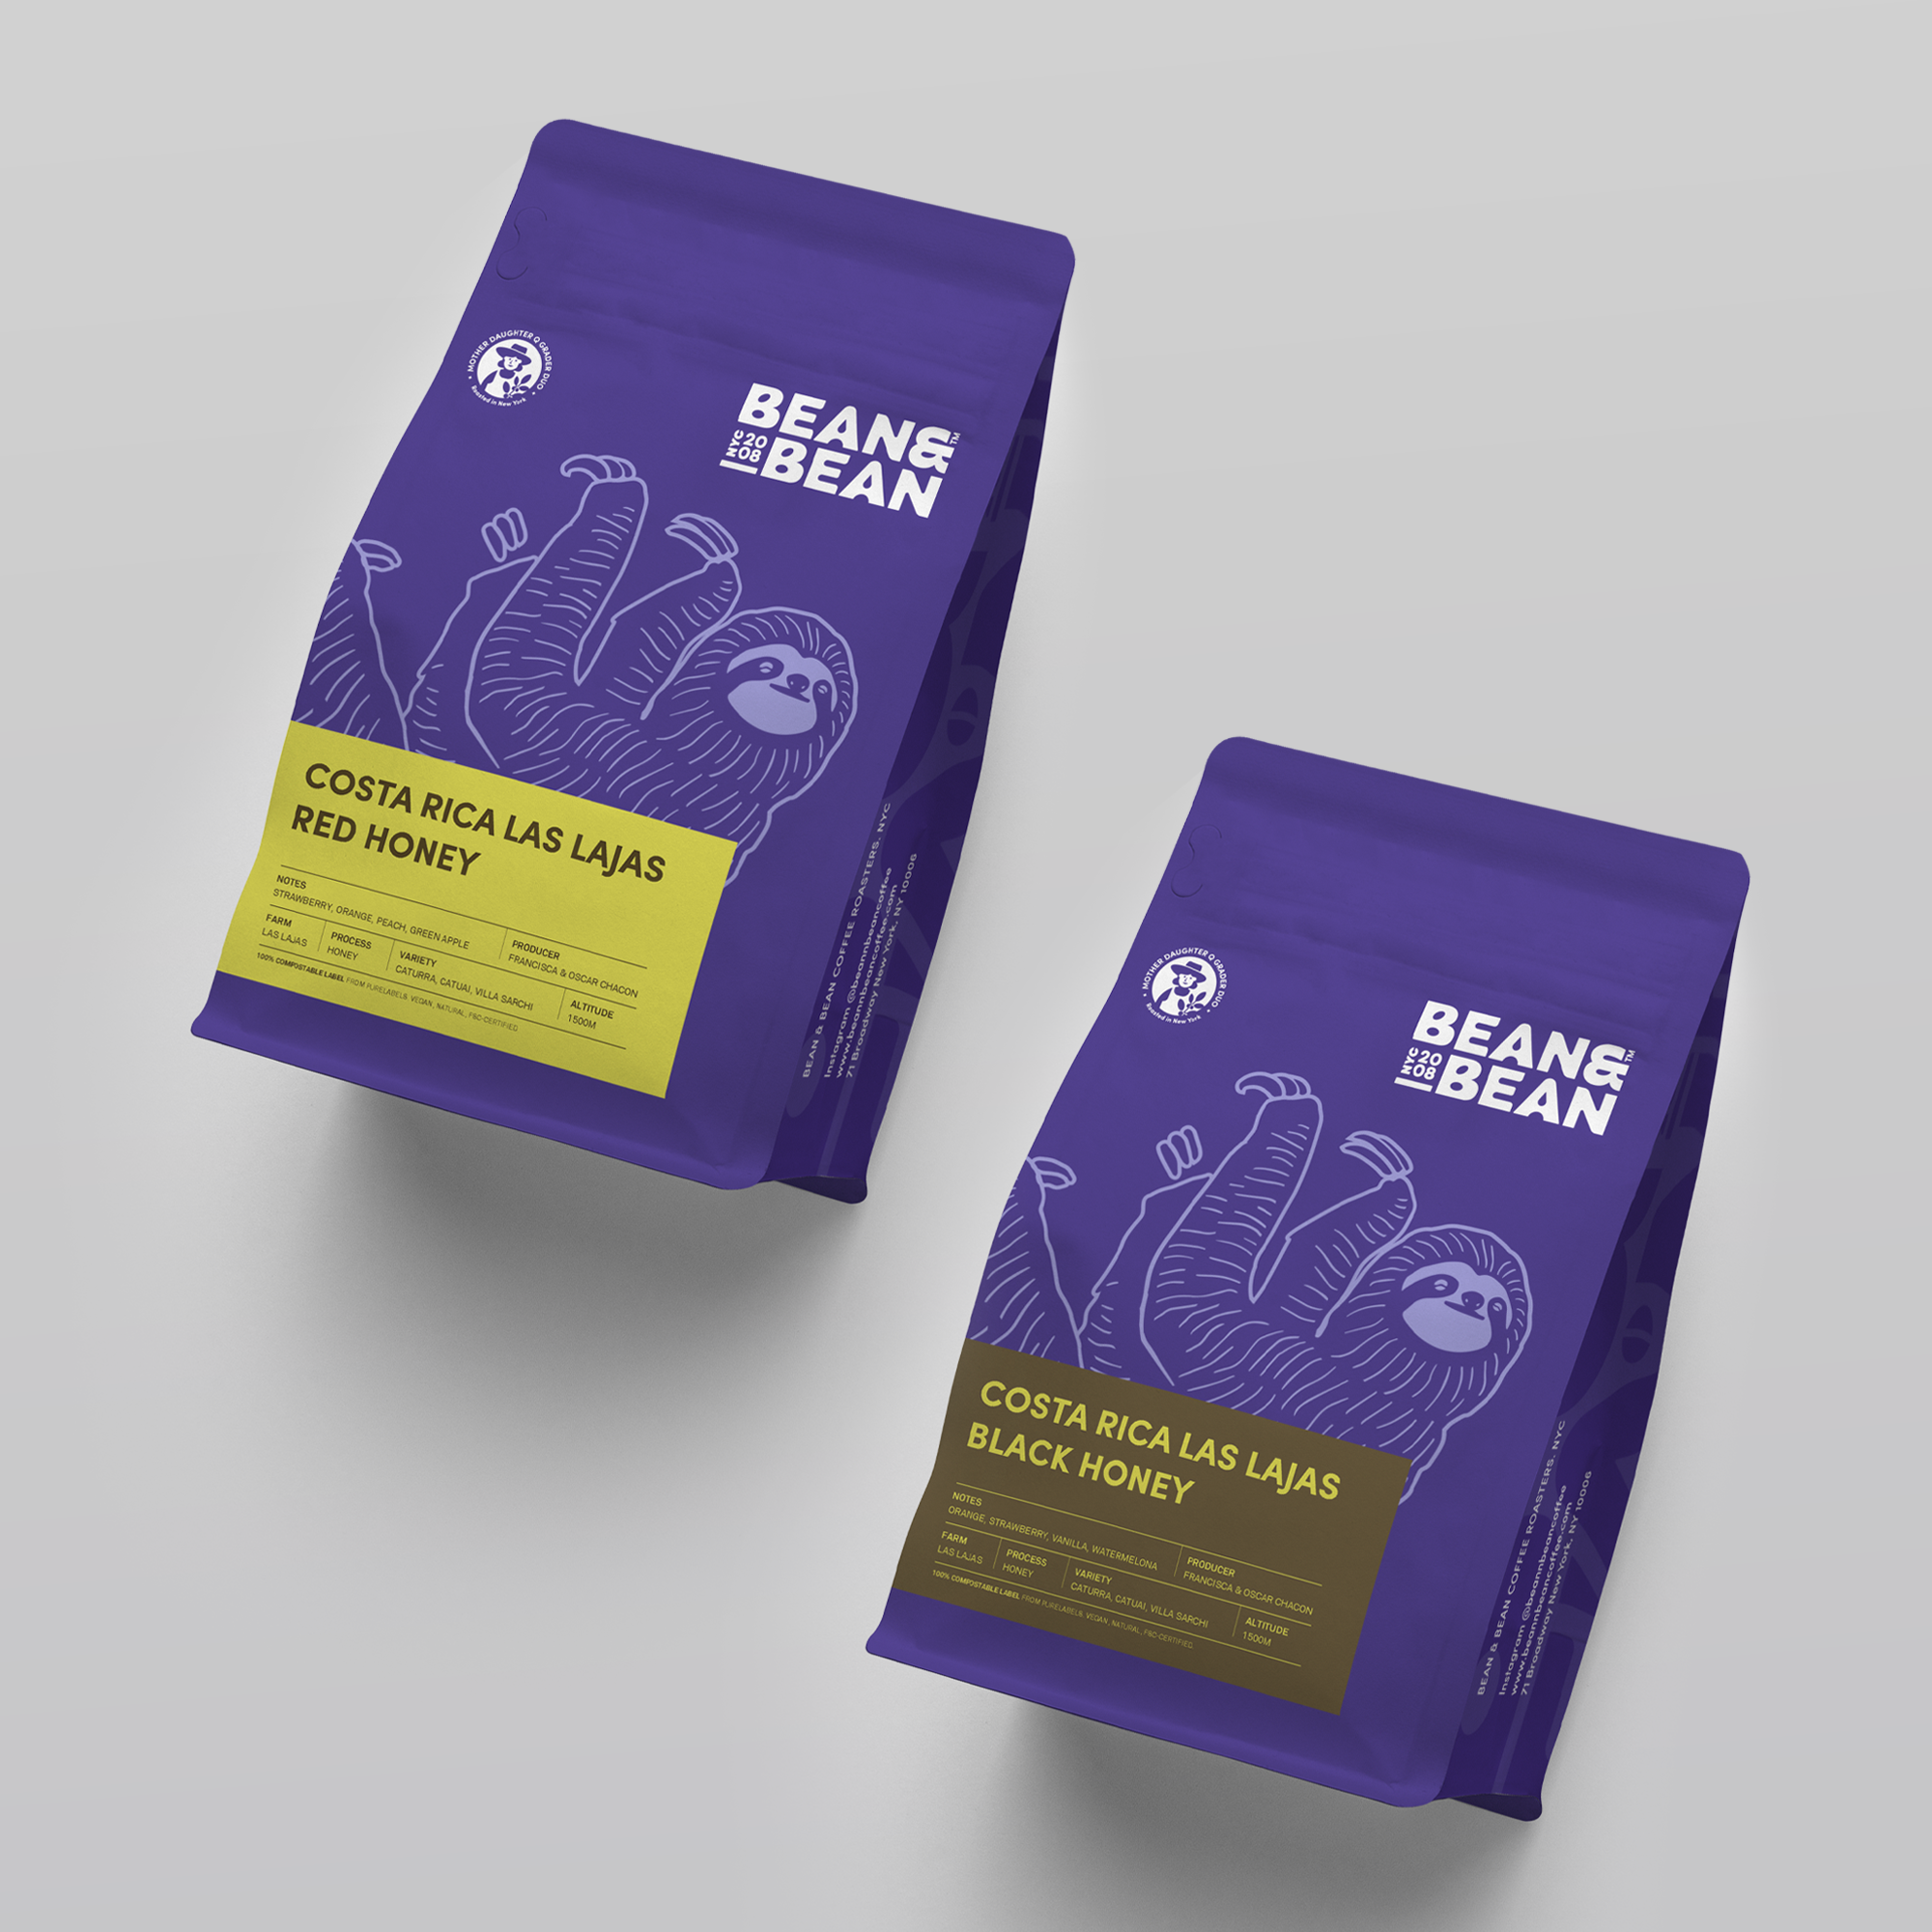 Two Purple "Bean and Bean Coffee" Bags, one with a yellow label that says "Costa Rica Las Lajas Red Honey" and the other with a brown label that says "Costa Rica Las Lajas Black Honey"